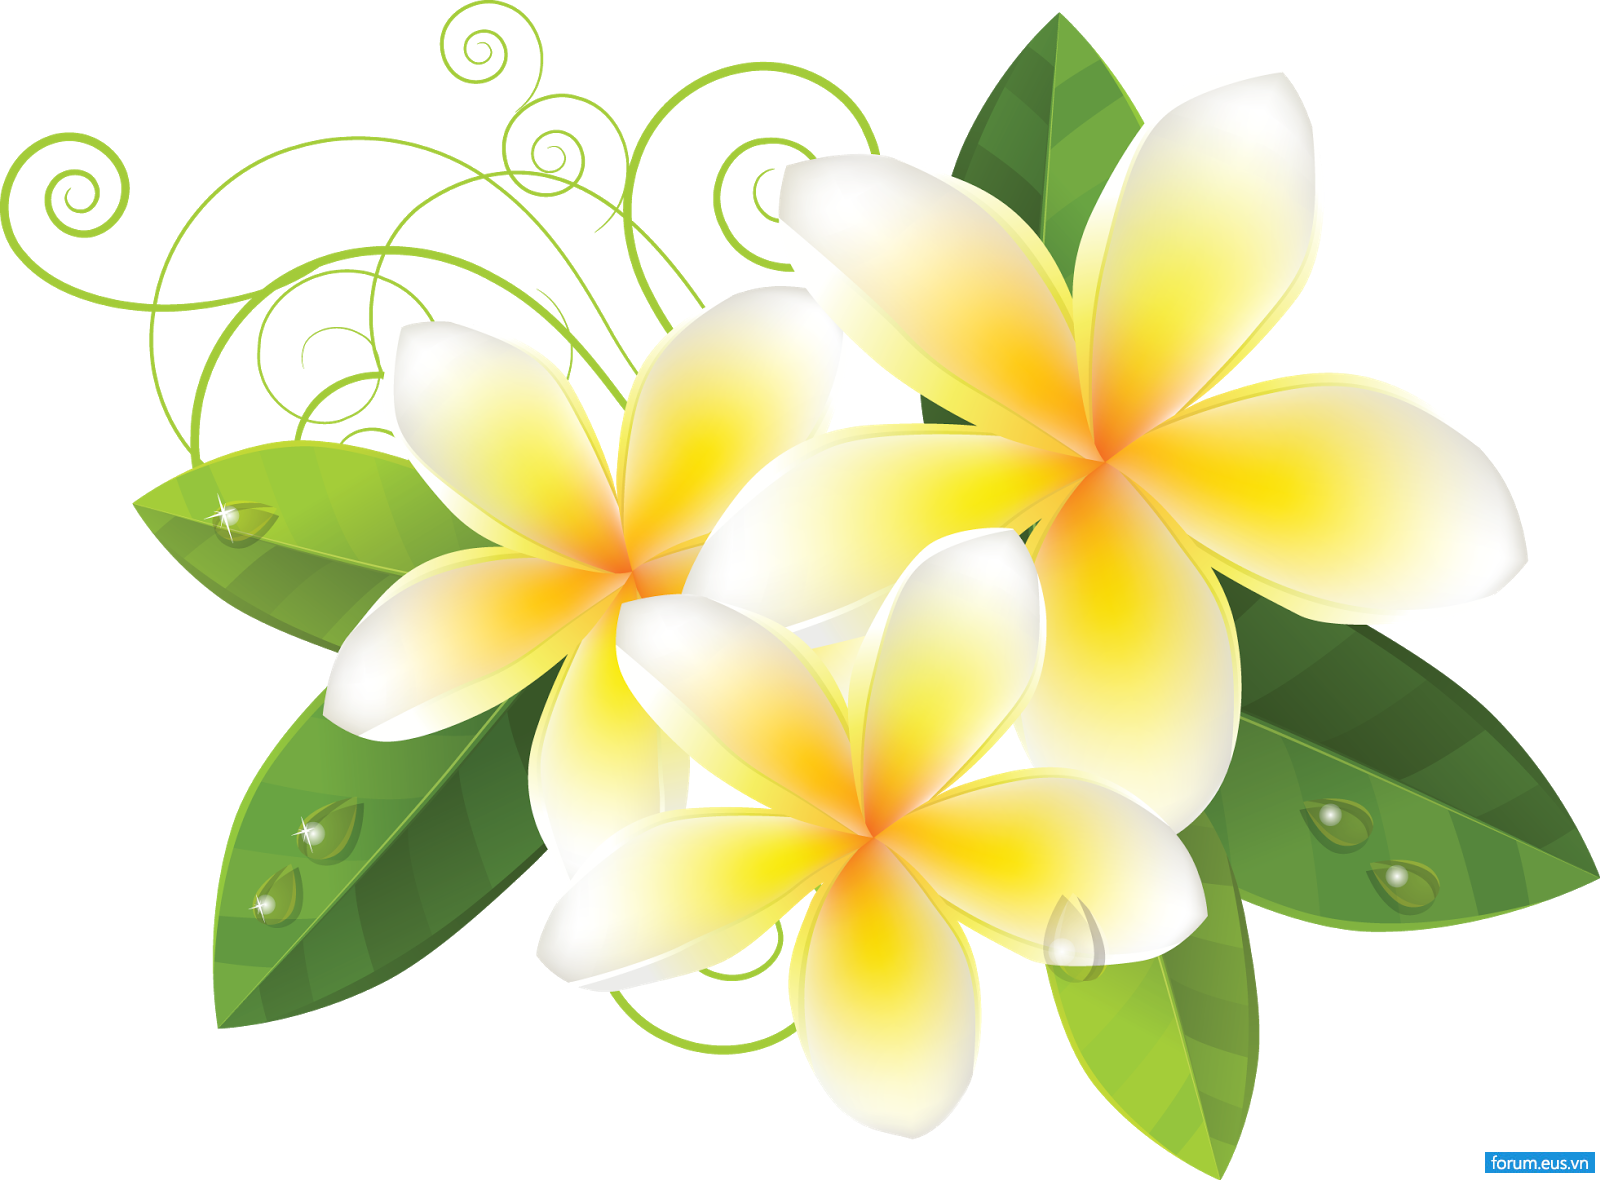 Download Vv Twine Flowers 花 イラスト 無料 プルメリア Png Image With No Background Pngkey Com